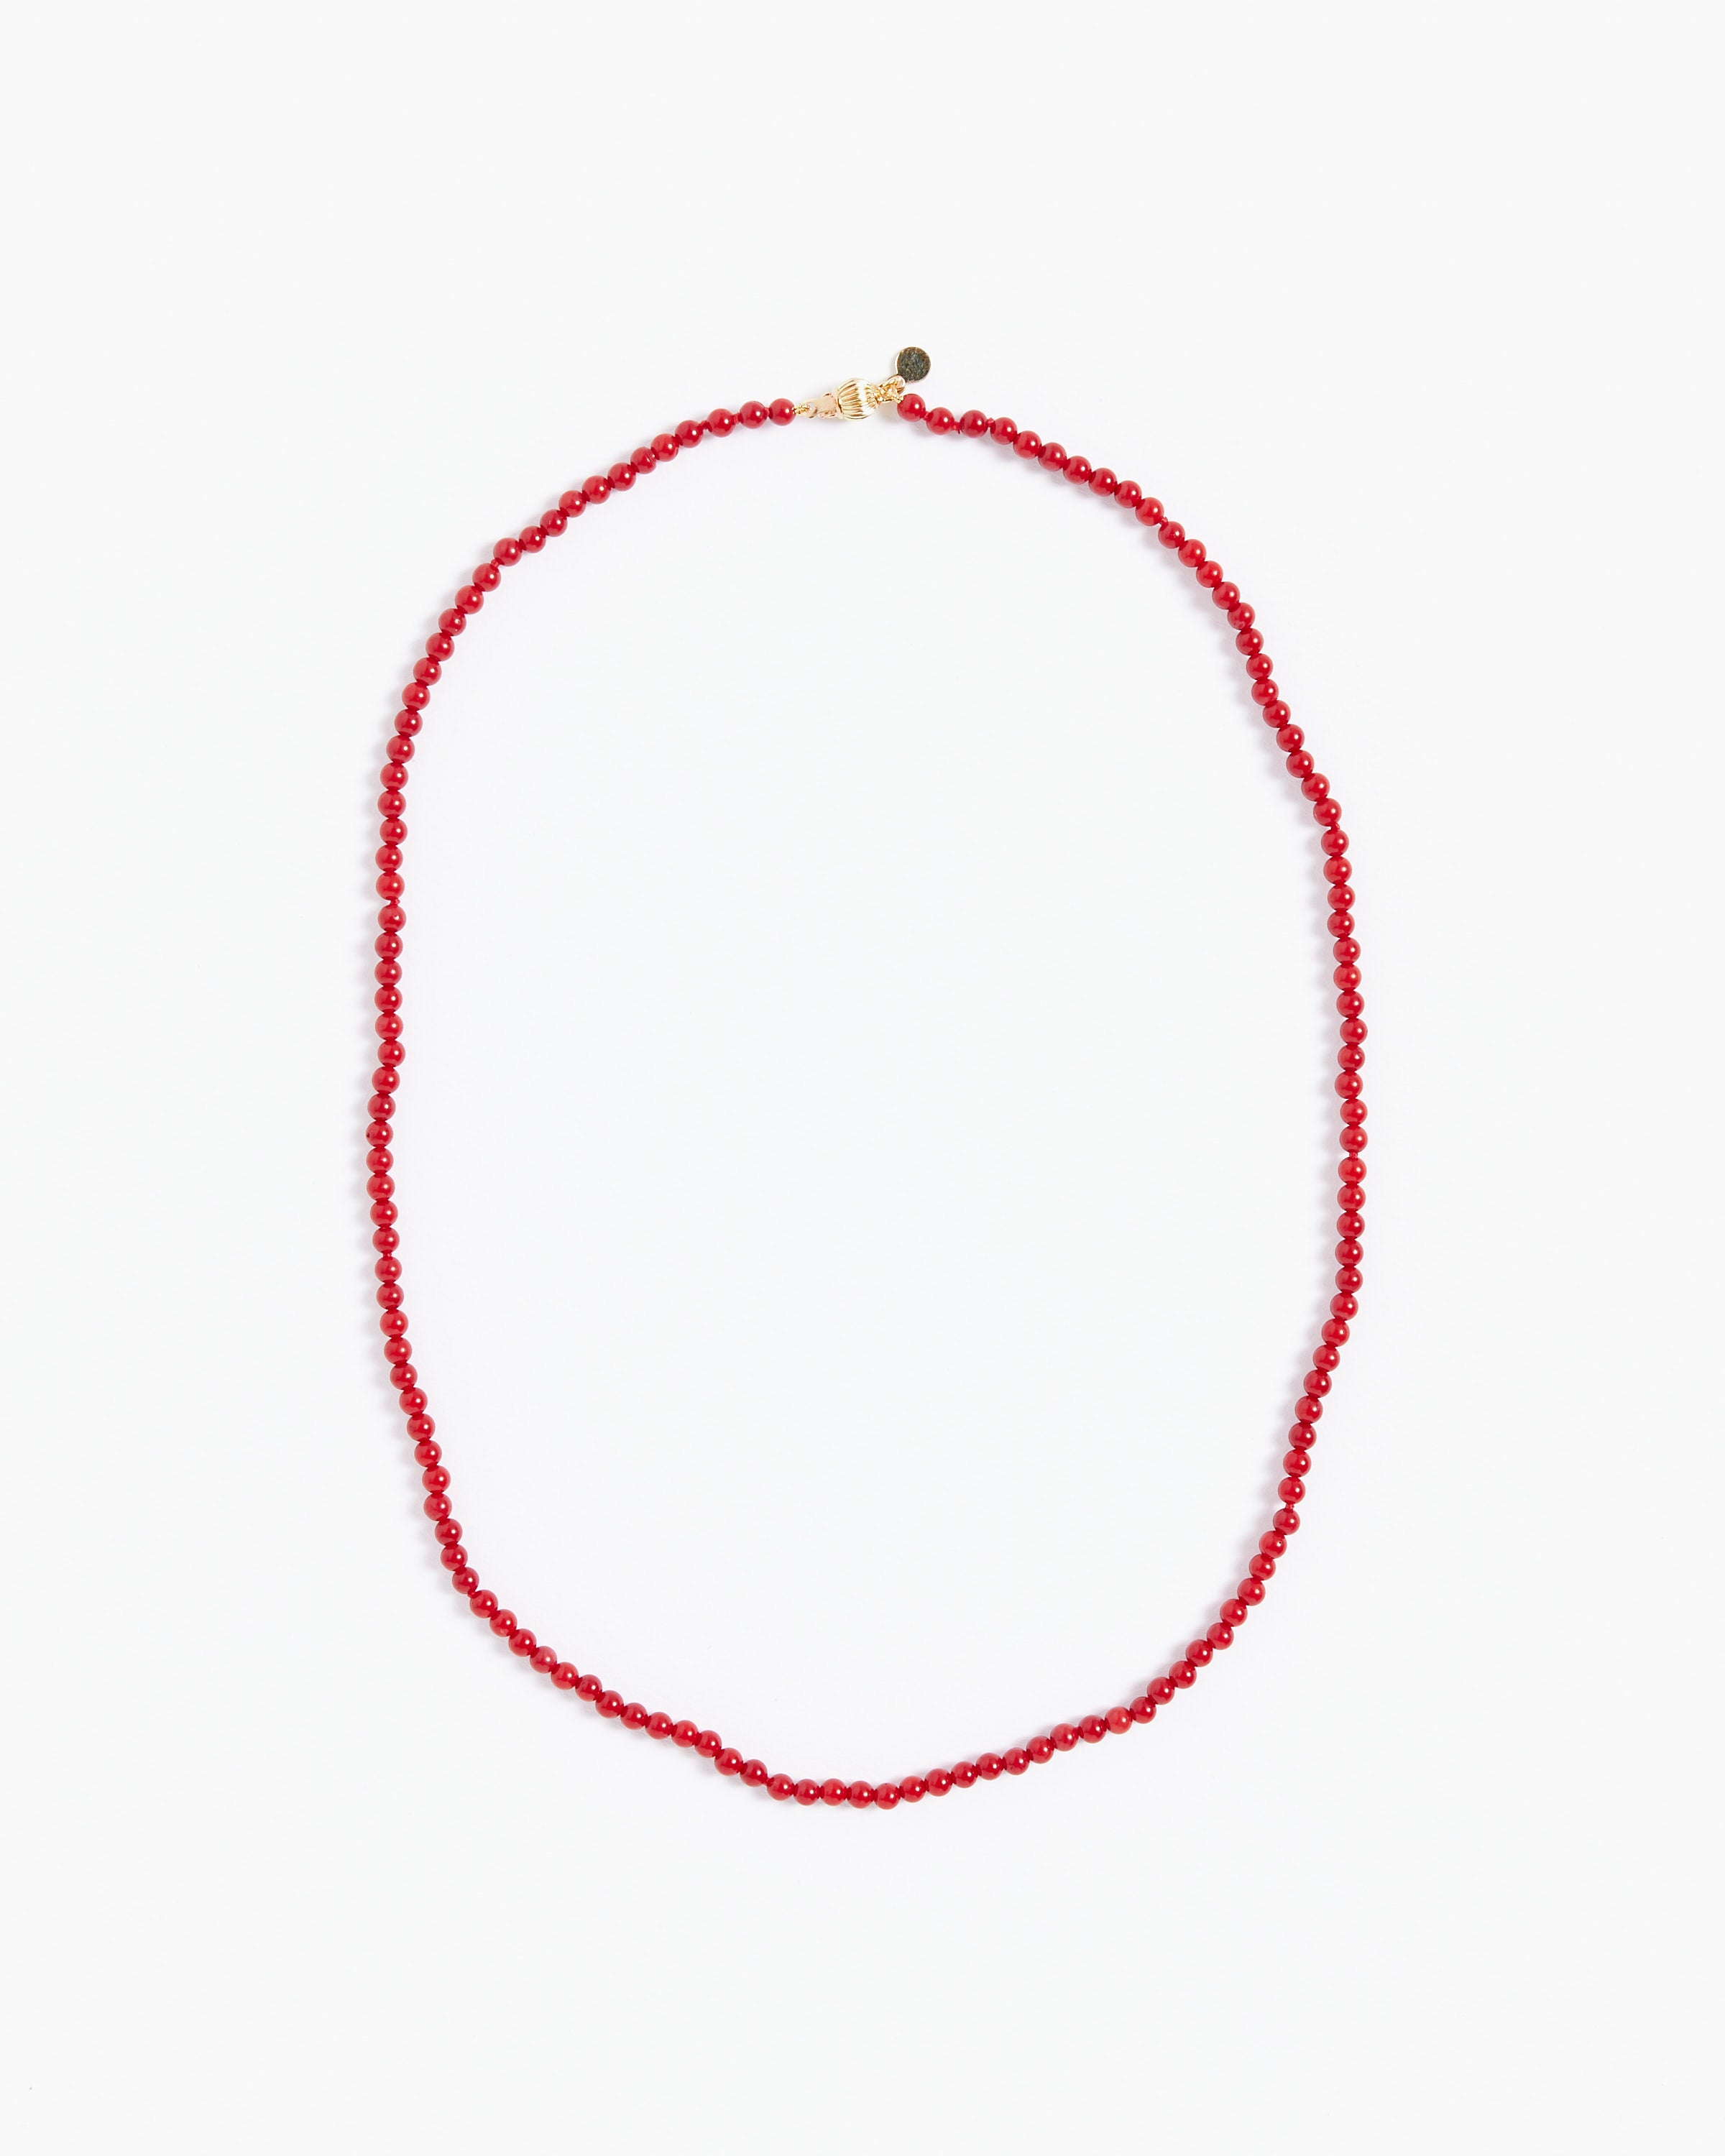 Bamboo Necklace in Red Coral